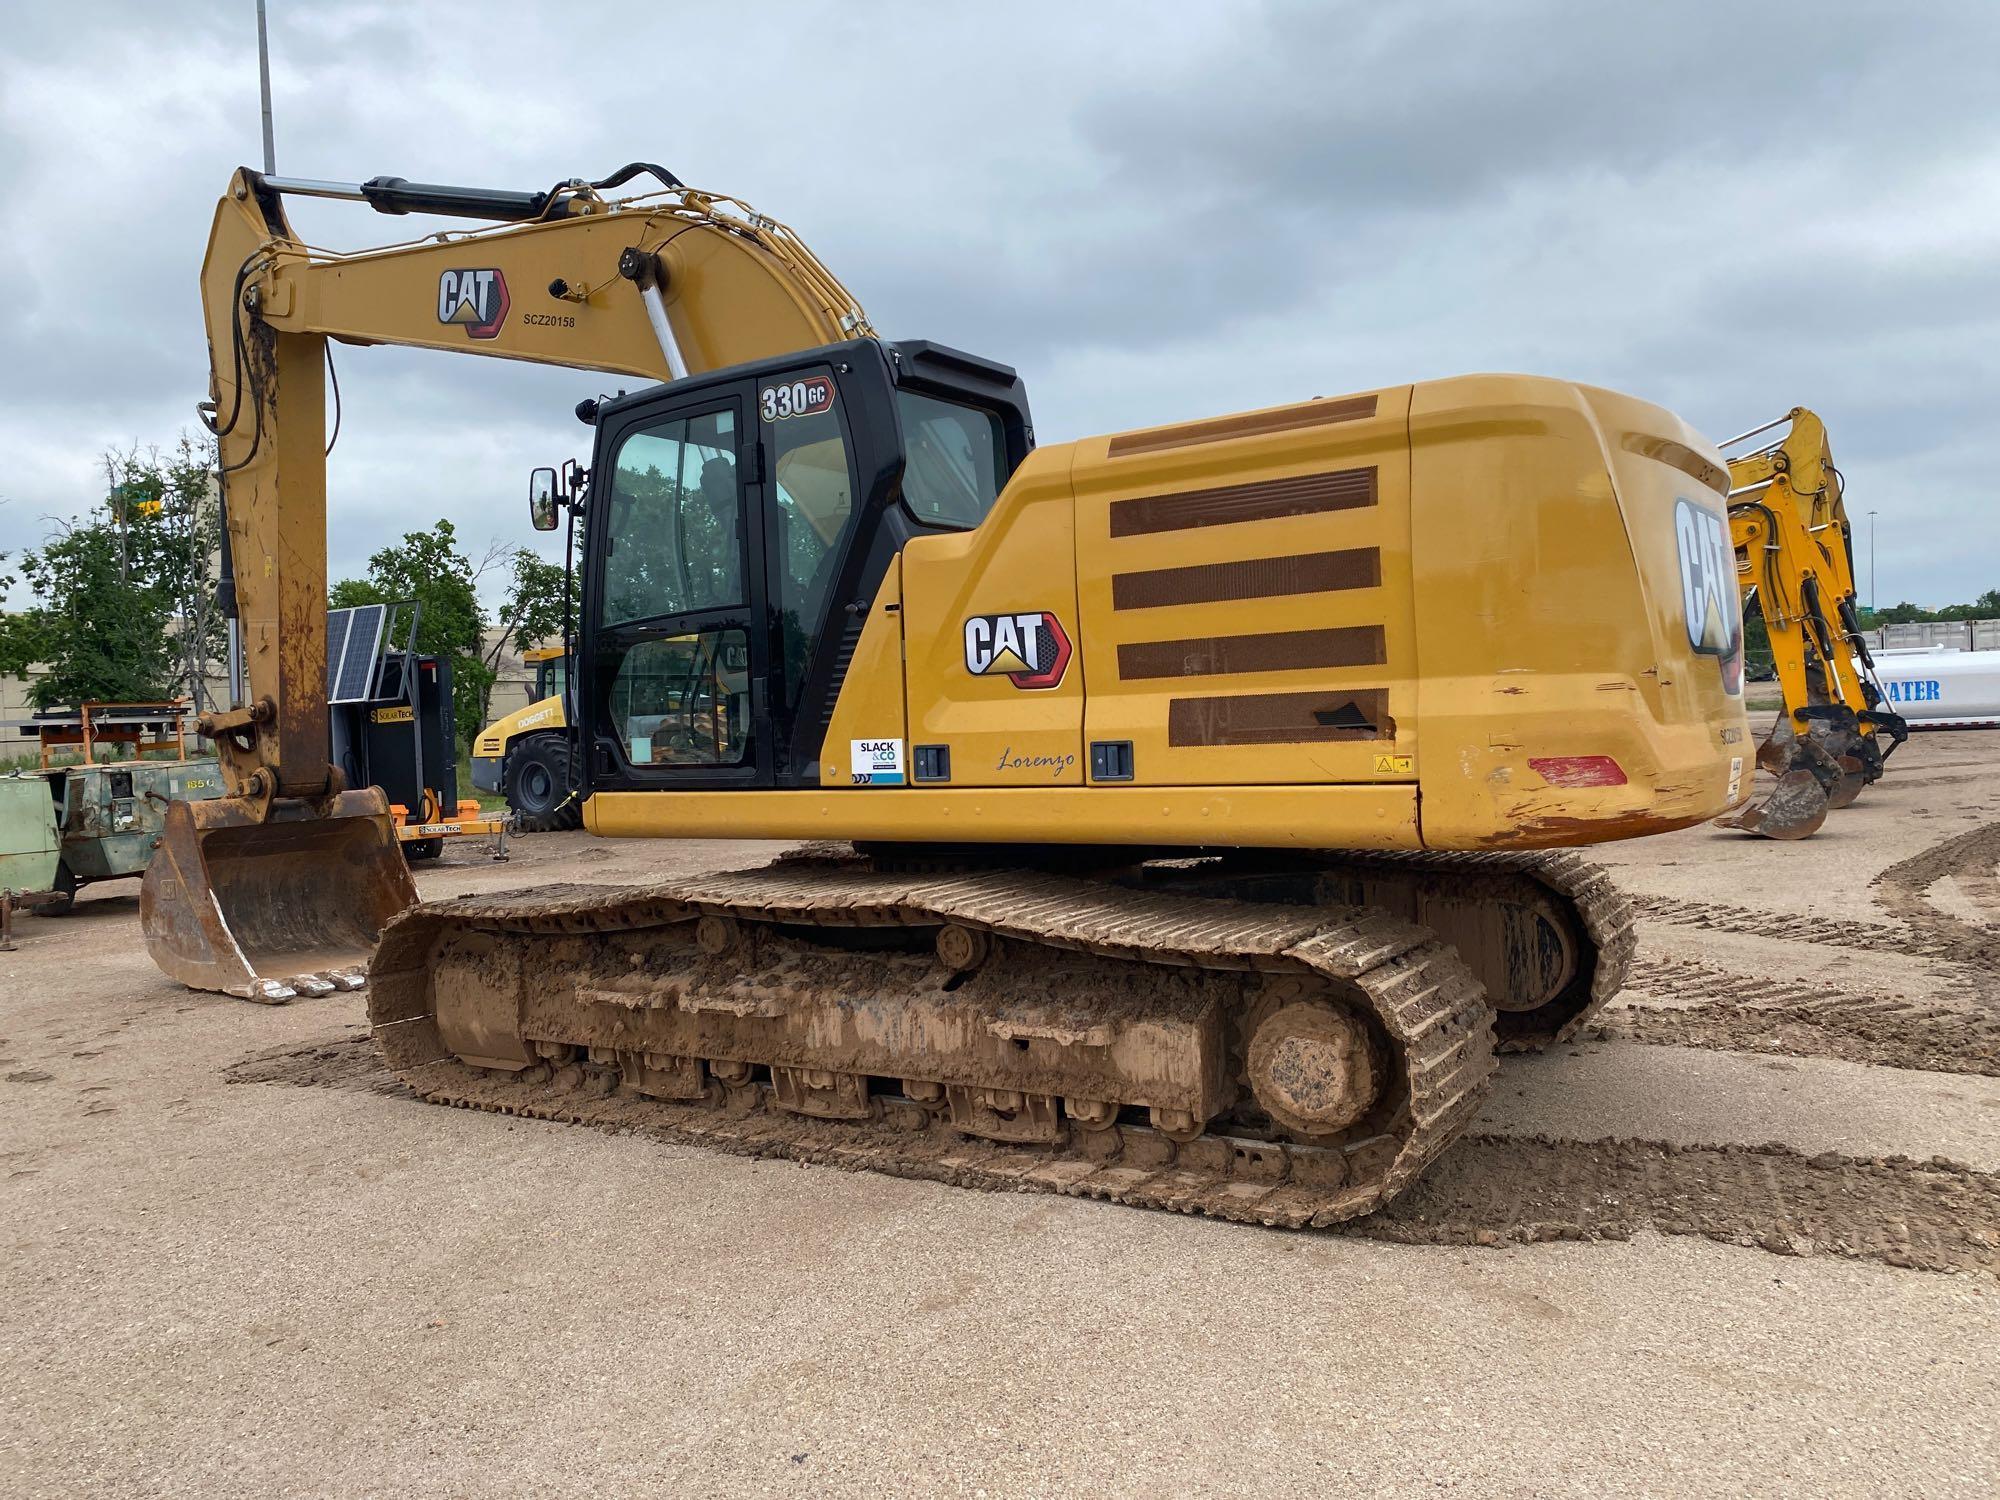 2022 CAT 330GC HYDRAULIC EXCAVATOR SN:20158 powered by Cat C4.4 diesel engine, equipped with Cab,